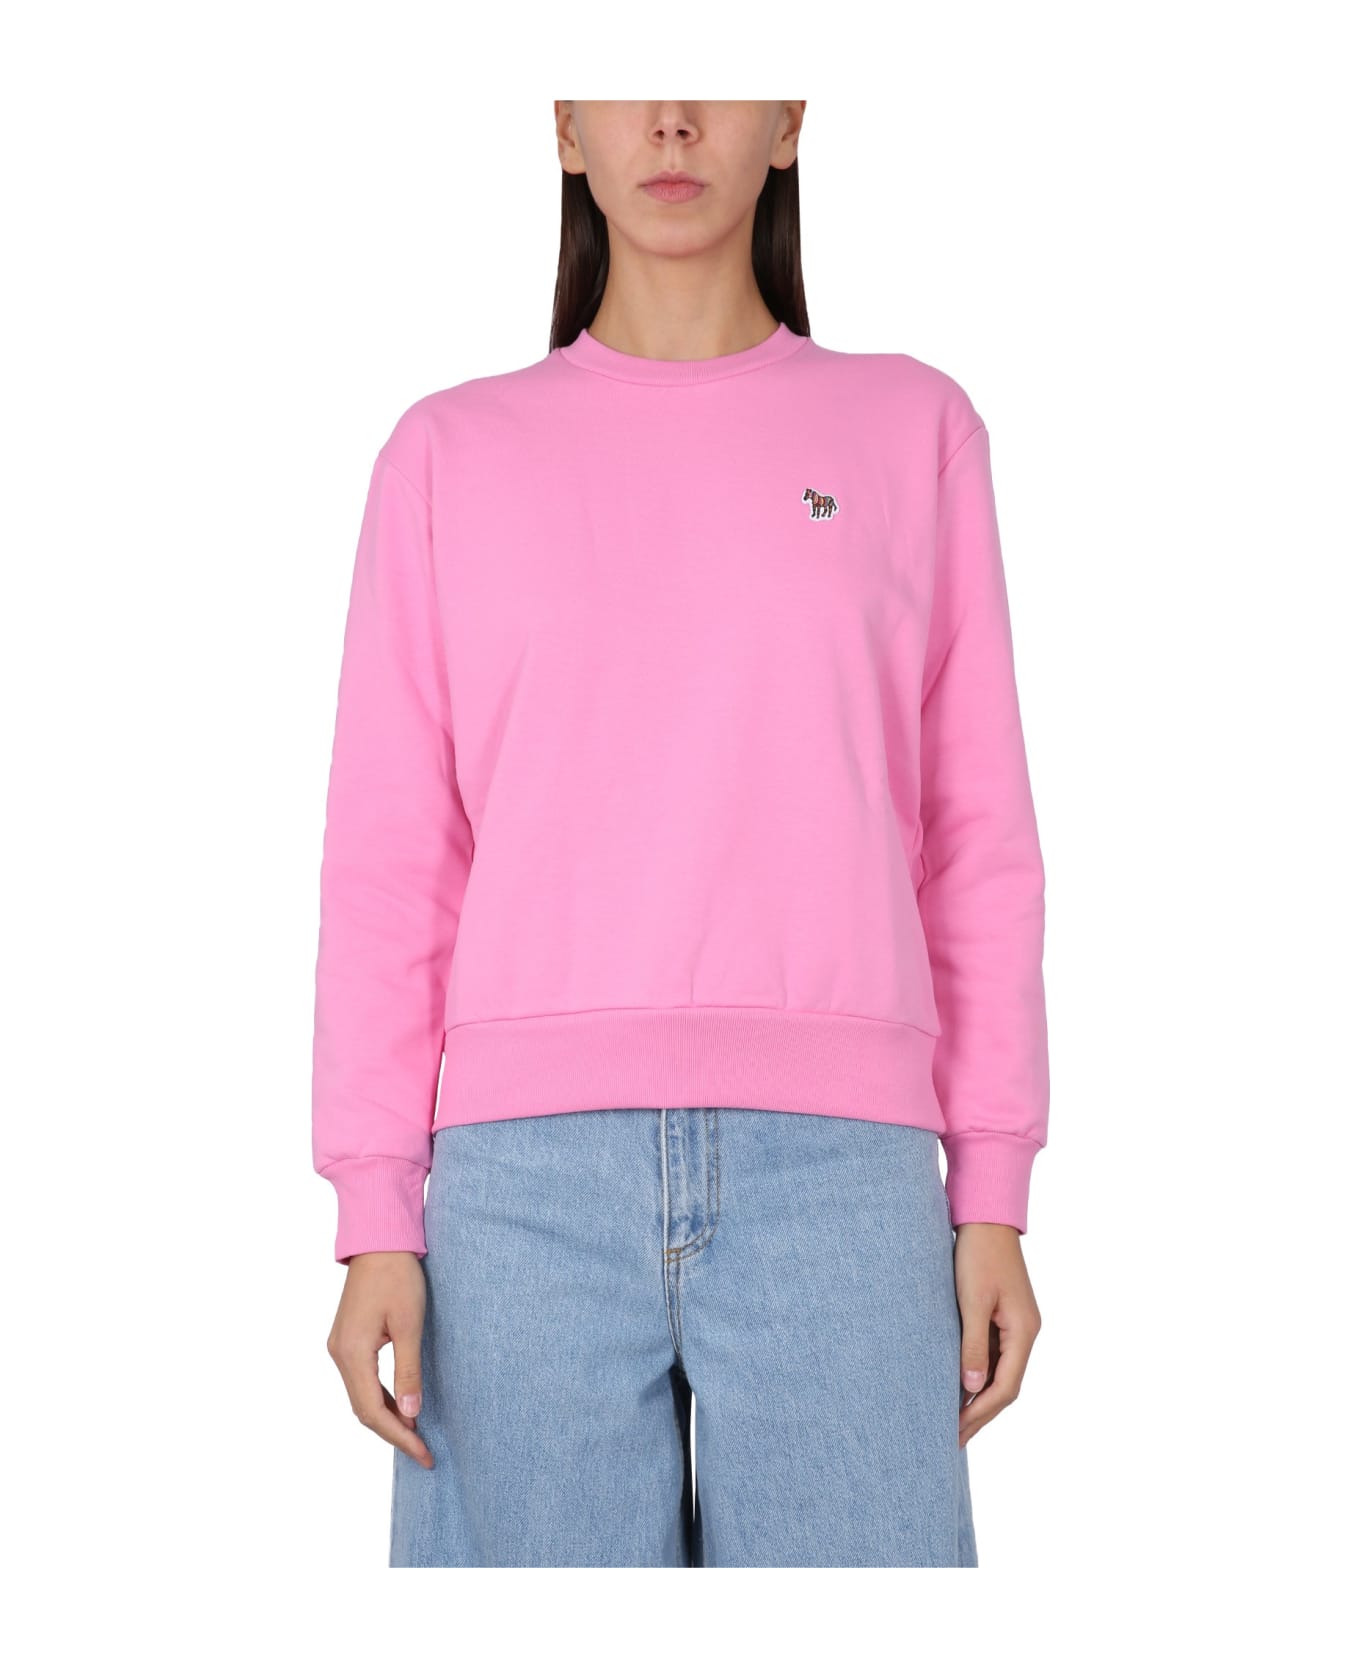 PS by Paul Smith Sweatshirt With Zebra Patch - PINK